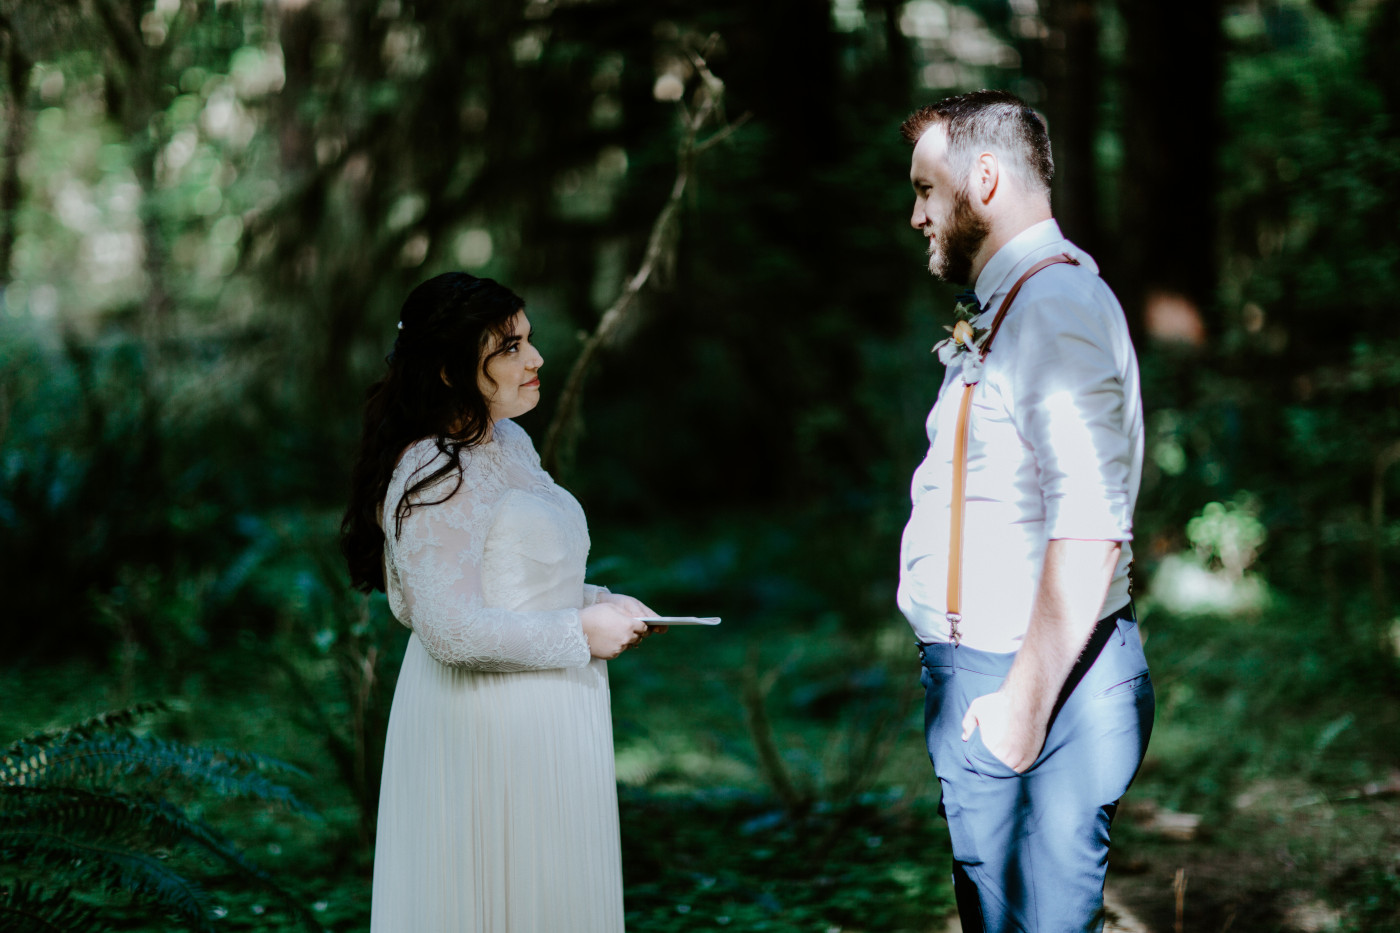 Jack and Brooke during their elopement. Elopement photography at Olympic National Park by Sienna Plus Josh.